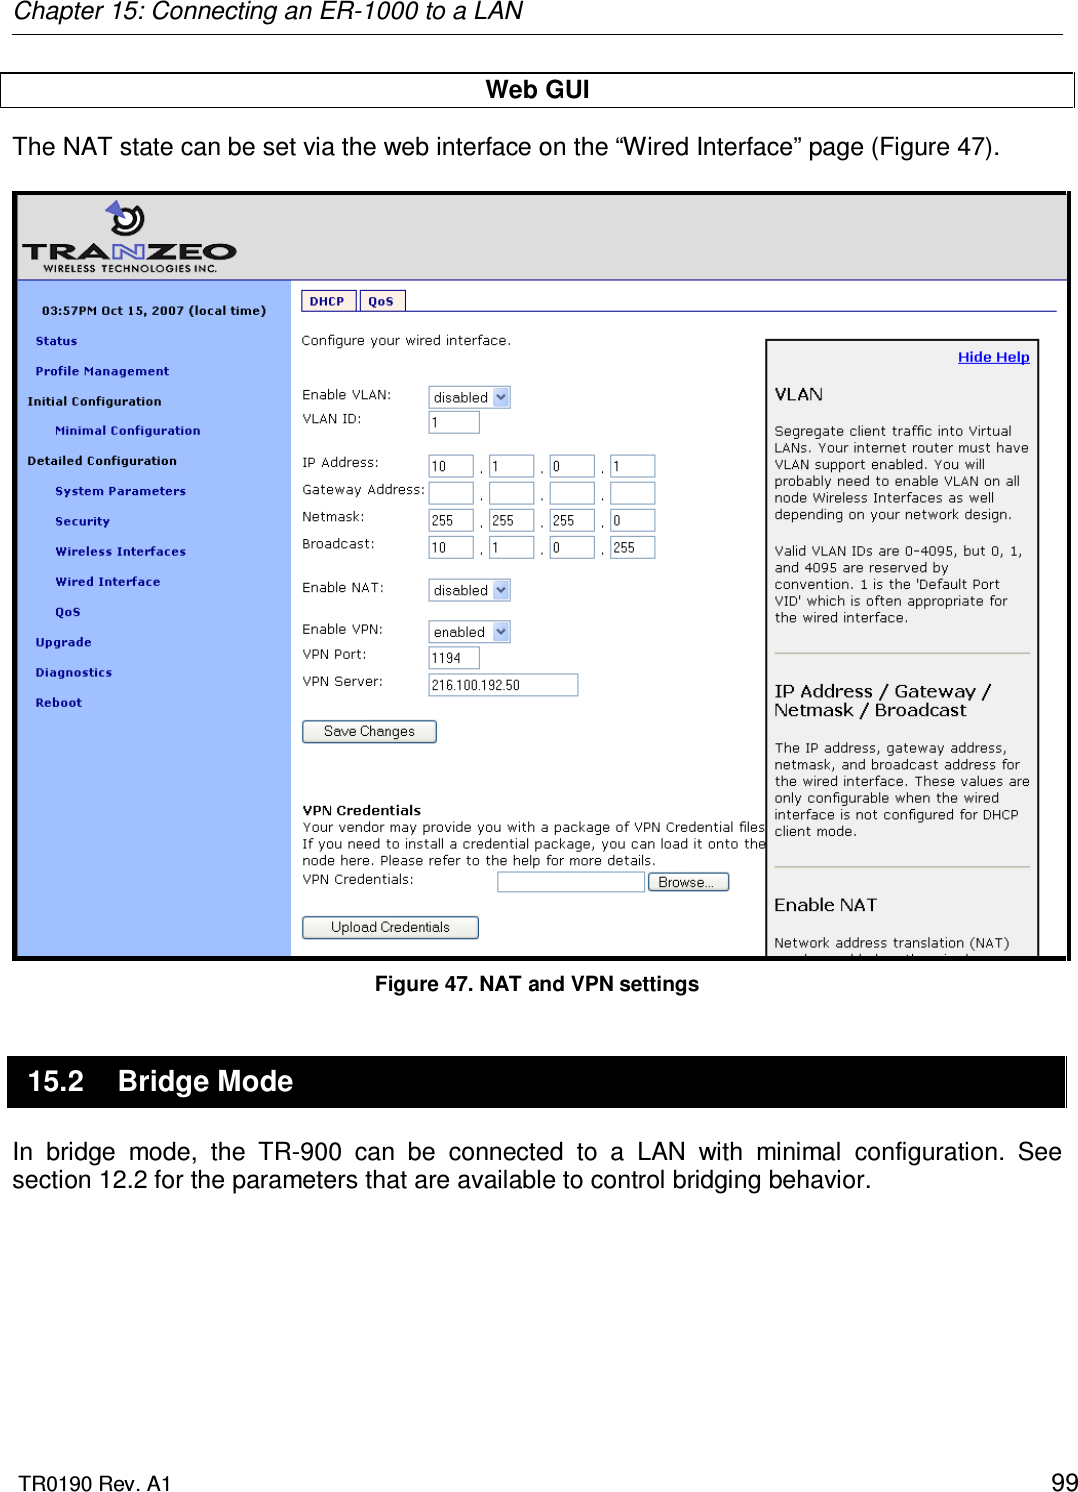 Chapter 15: Connecting an ER-1000 to a LAN  TR0190 Rev. A1    99 Web GUI The NAT state can be set via the web interface on the “Wired Interface” page (Figure 47).   Figure 47. NAT and VPN settings 15.2  Bridge Mode In  bridge  mode,  the  TR-900  can  be  connected  to  a  LAN  with  minimal  configuration.  See section 12.2 for the parameters that are available to control bridging behavior.  